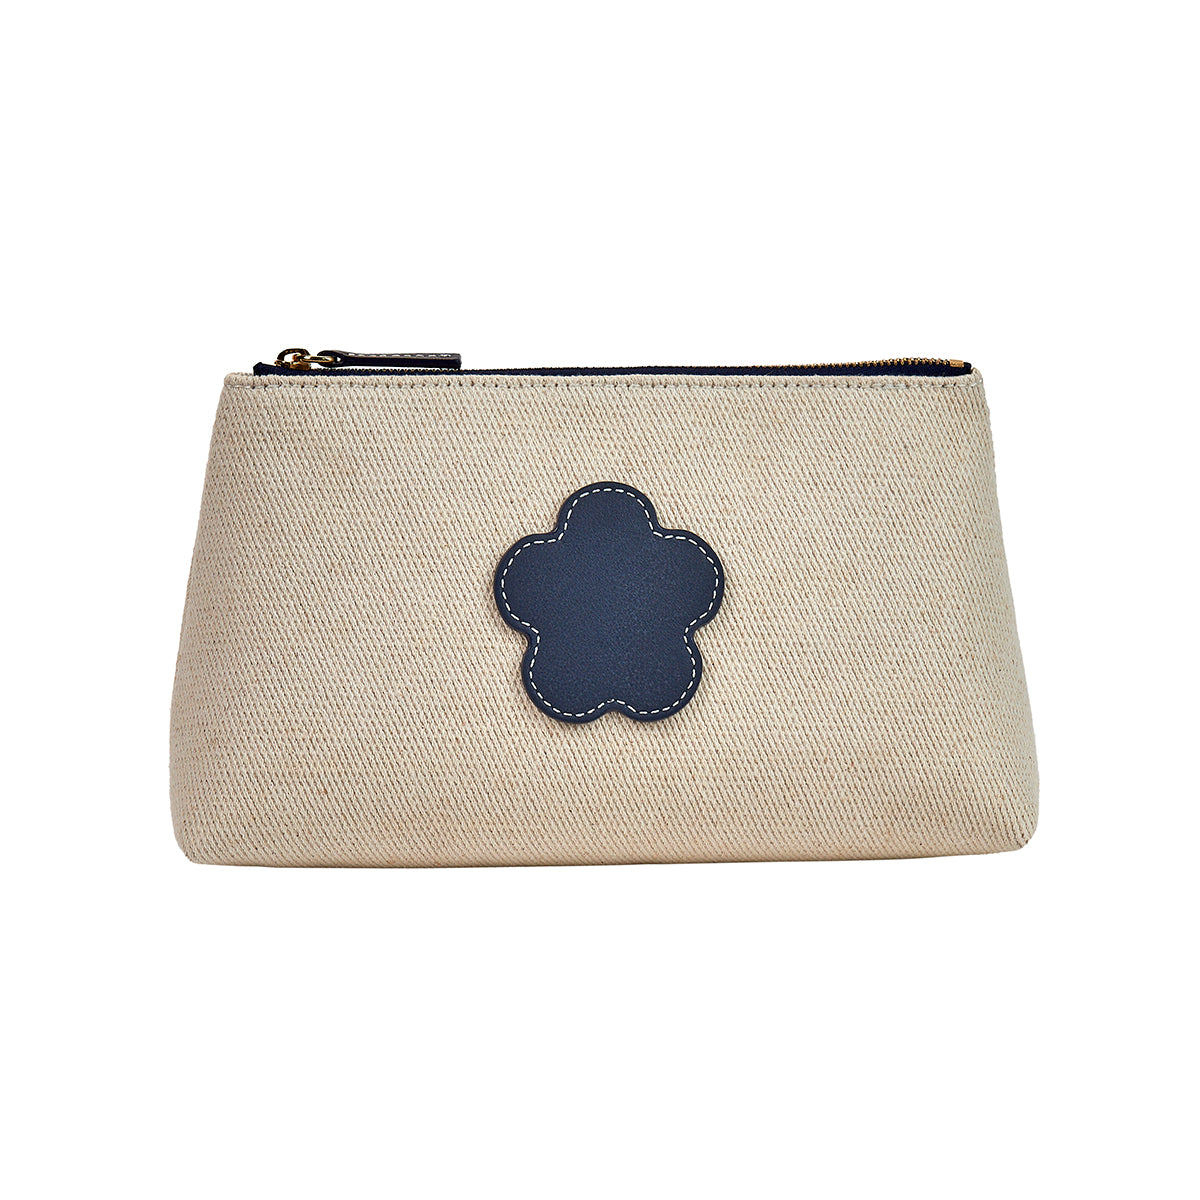 Madrid Pouch - Navy